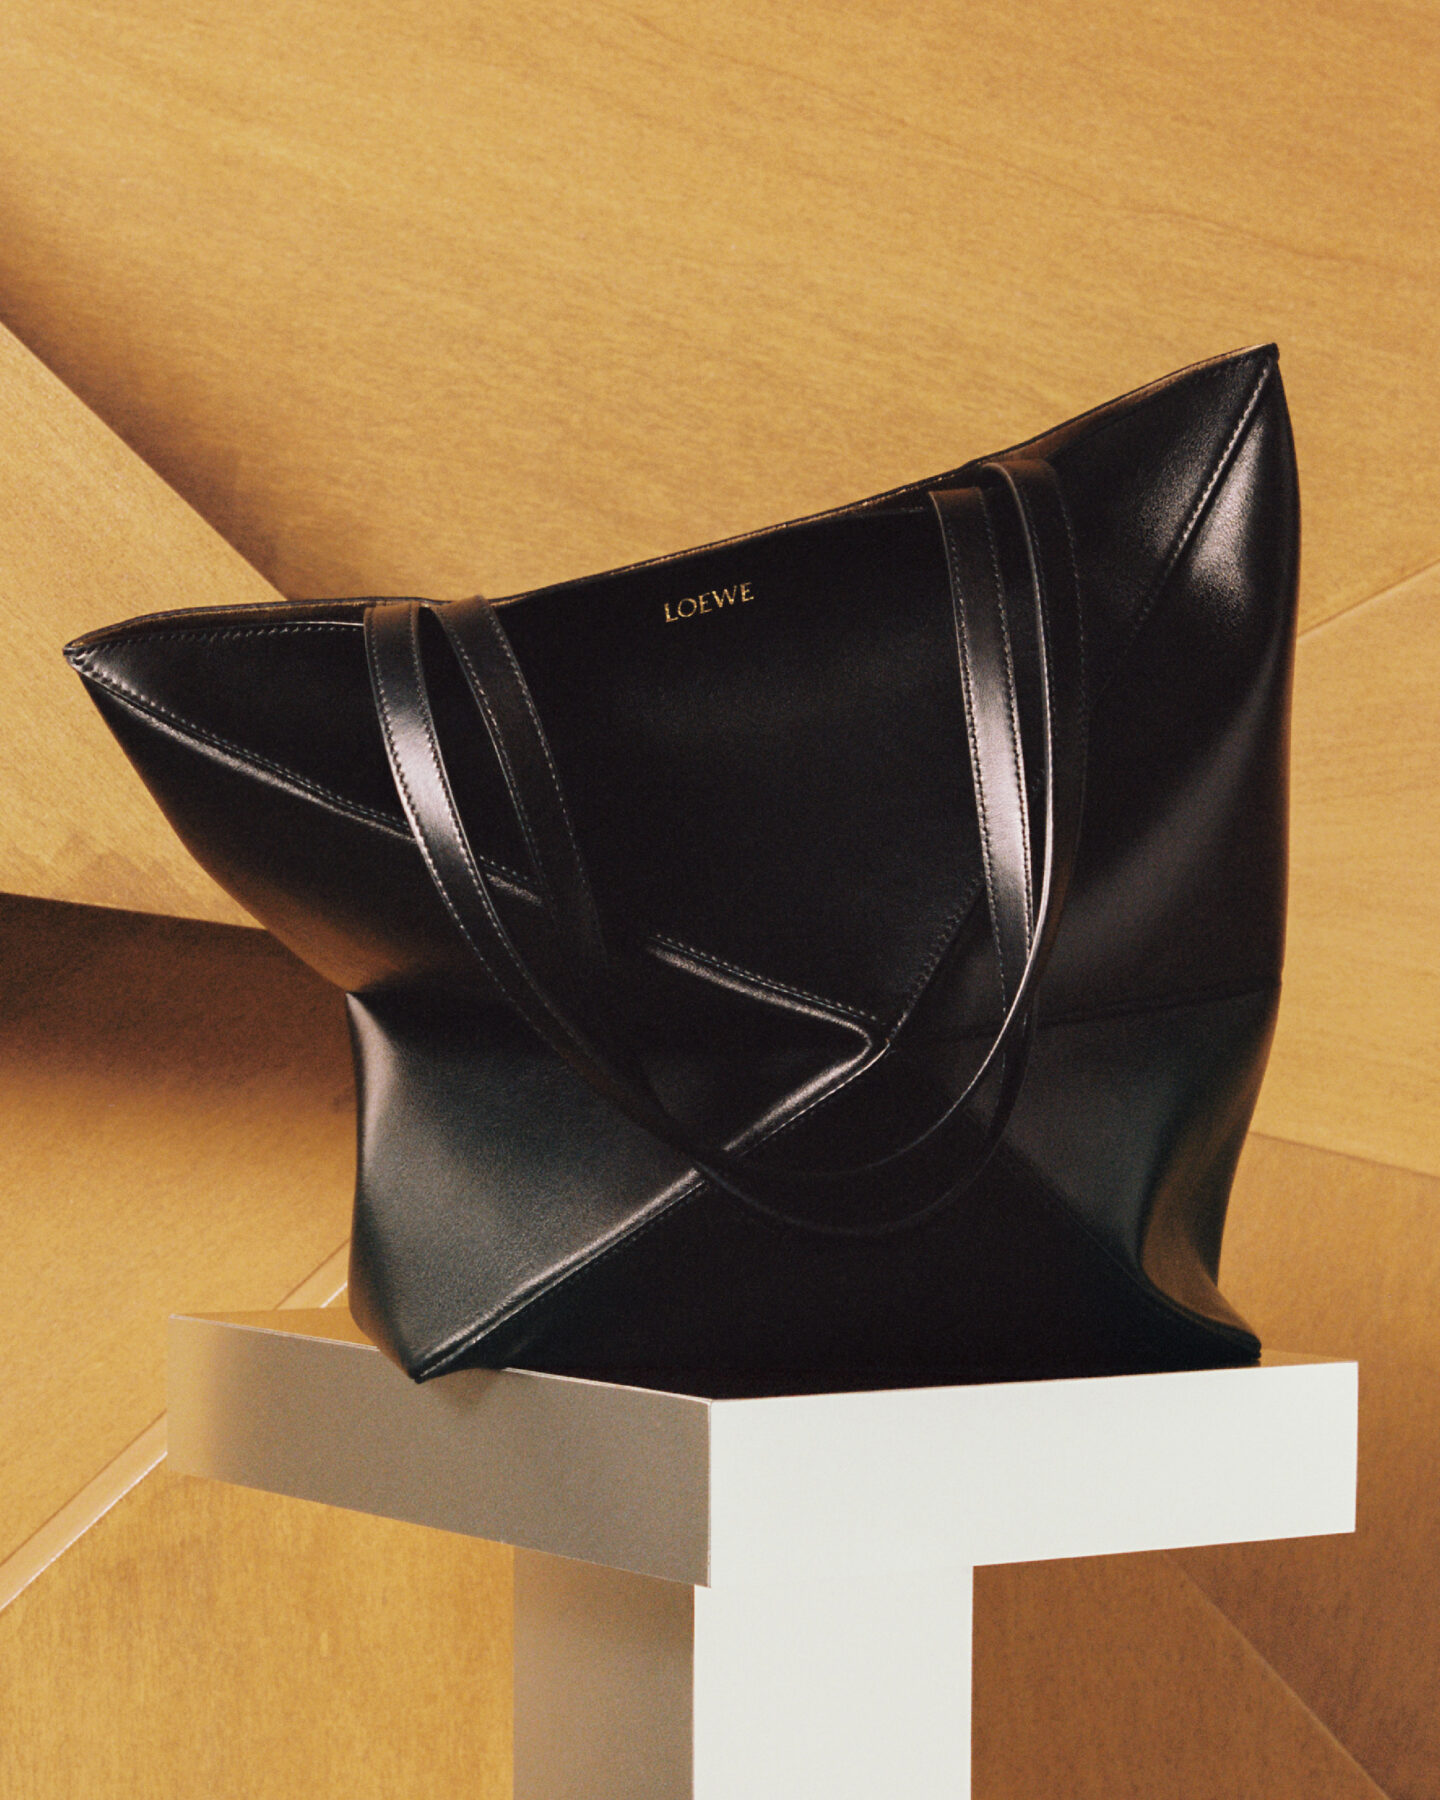 All about LOEWE's new Puzzle Fold Tote - HIGHXTAR.